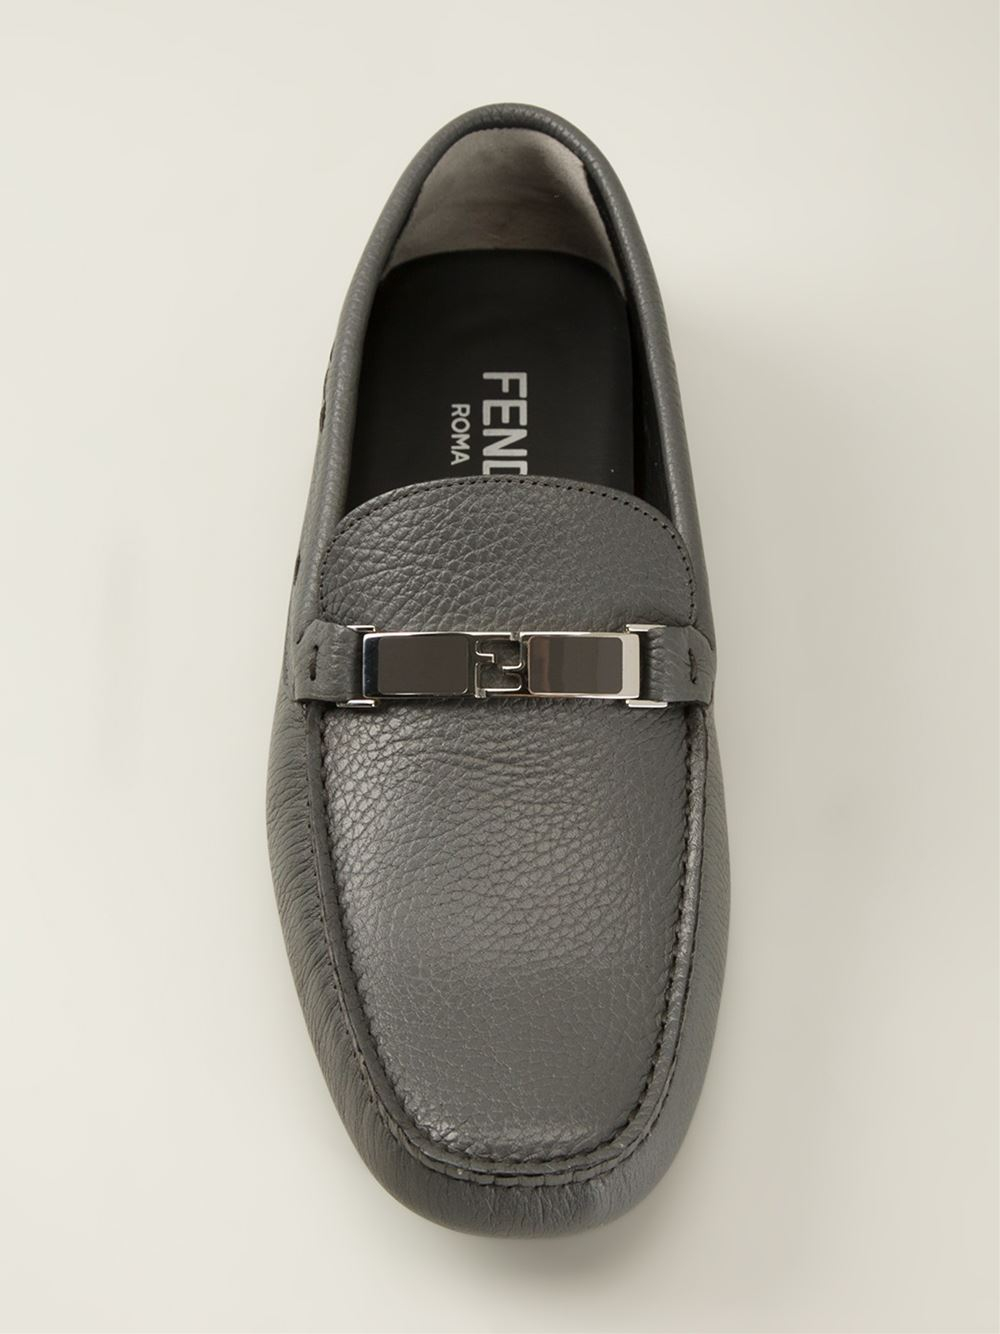 Fendi Signature Ff Driving Loafers in Grey (Gray) for Men - Lyst